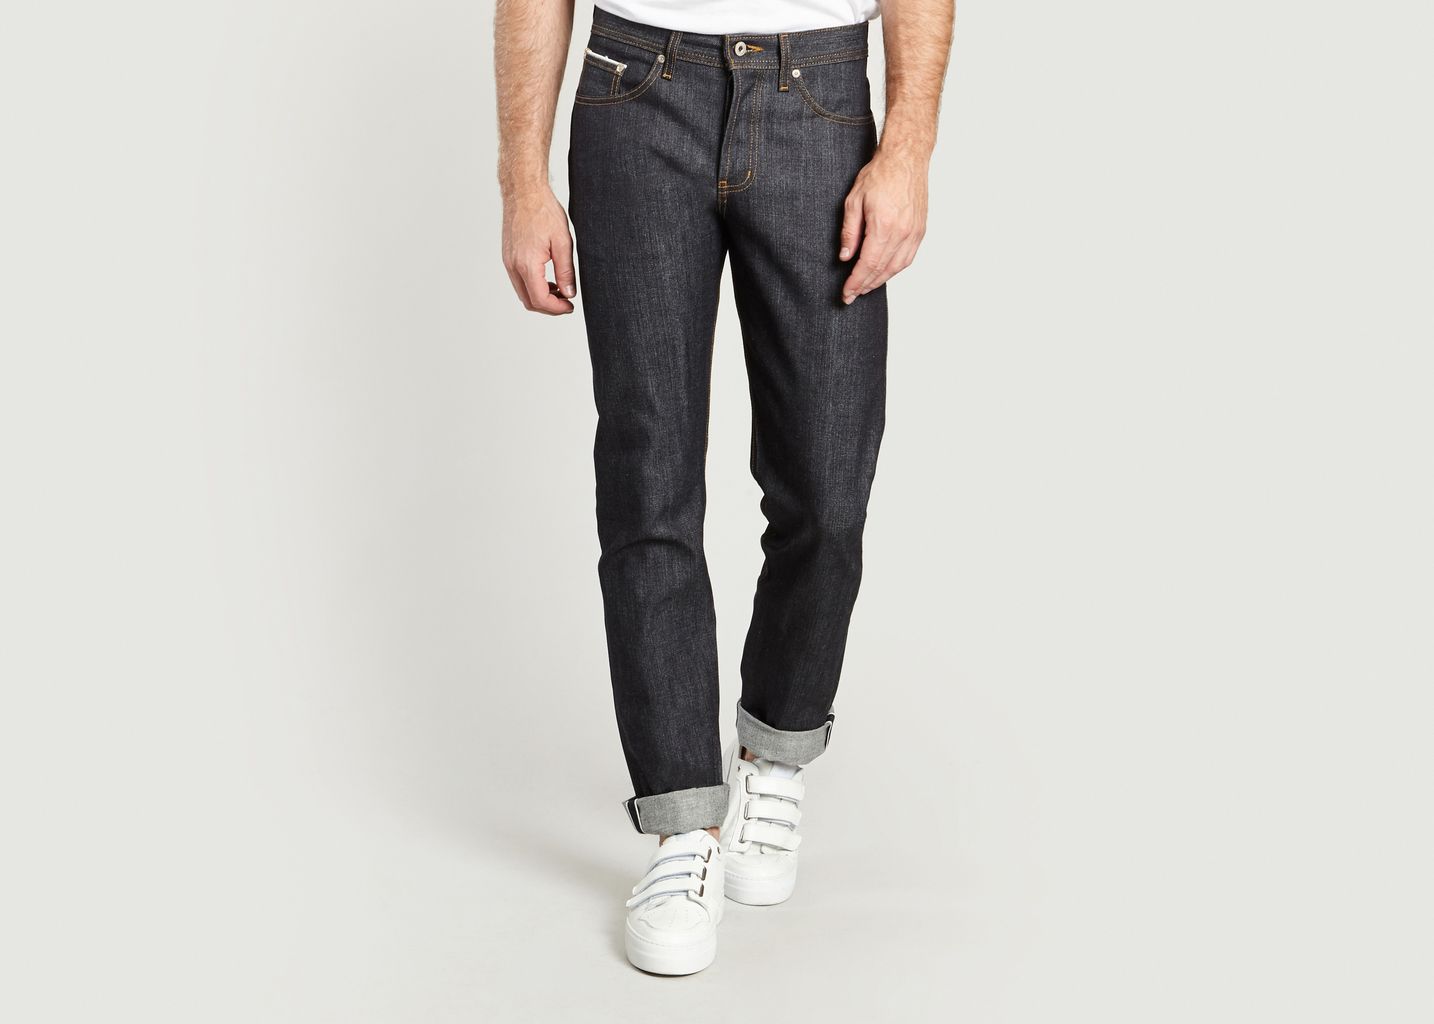 Weird Guy Selvedge Jeans Left Hand Twill - Naked and Famous